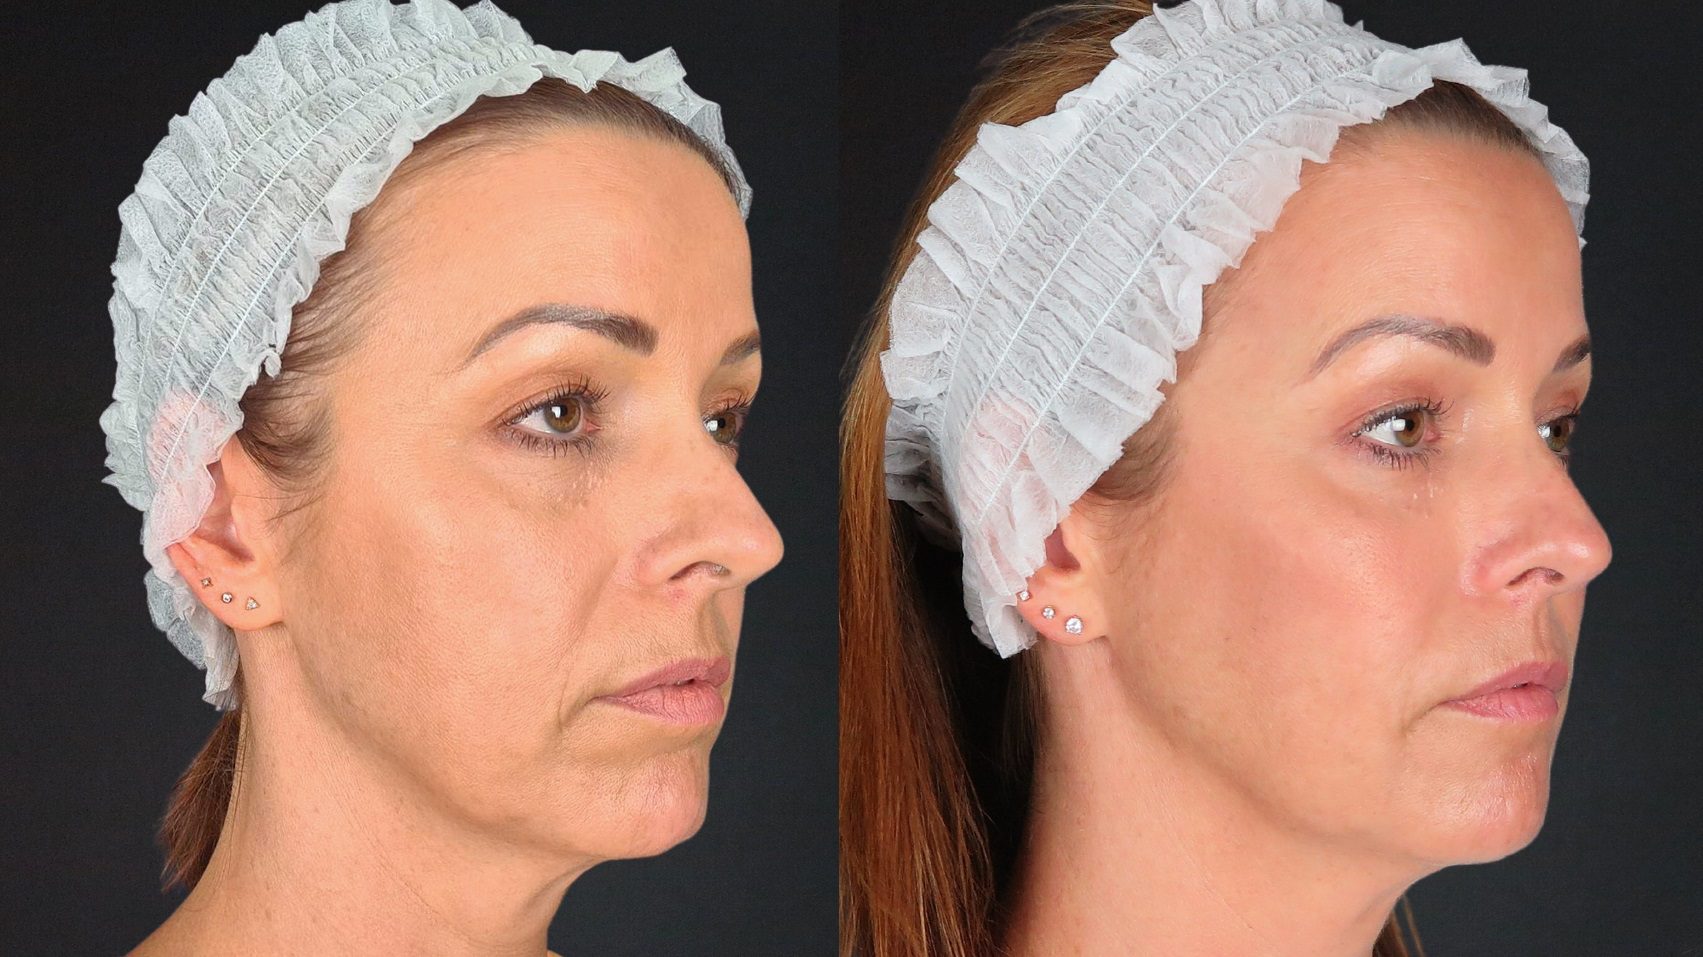 lower face lift with dermal fillers before and after -Side-1